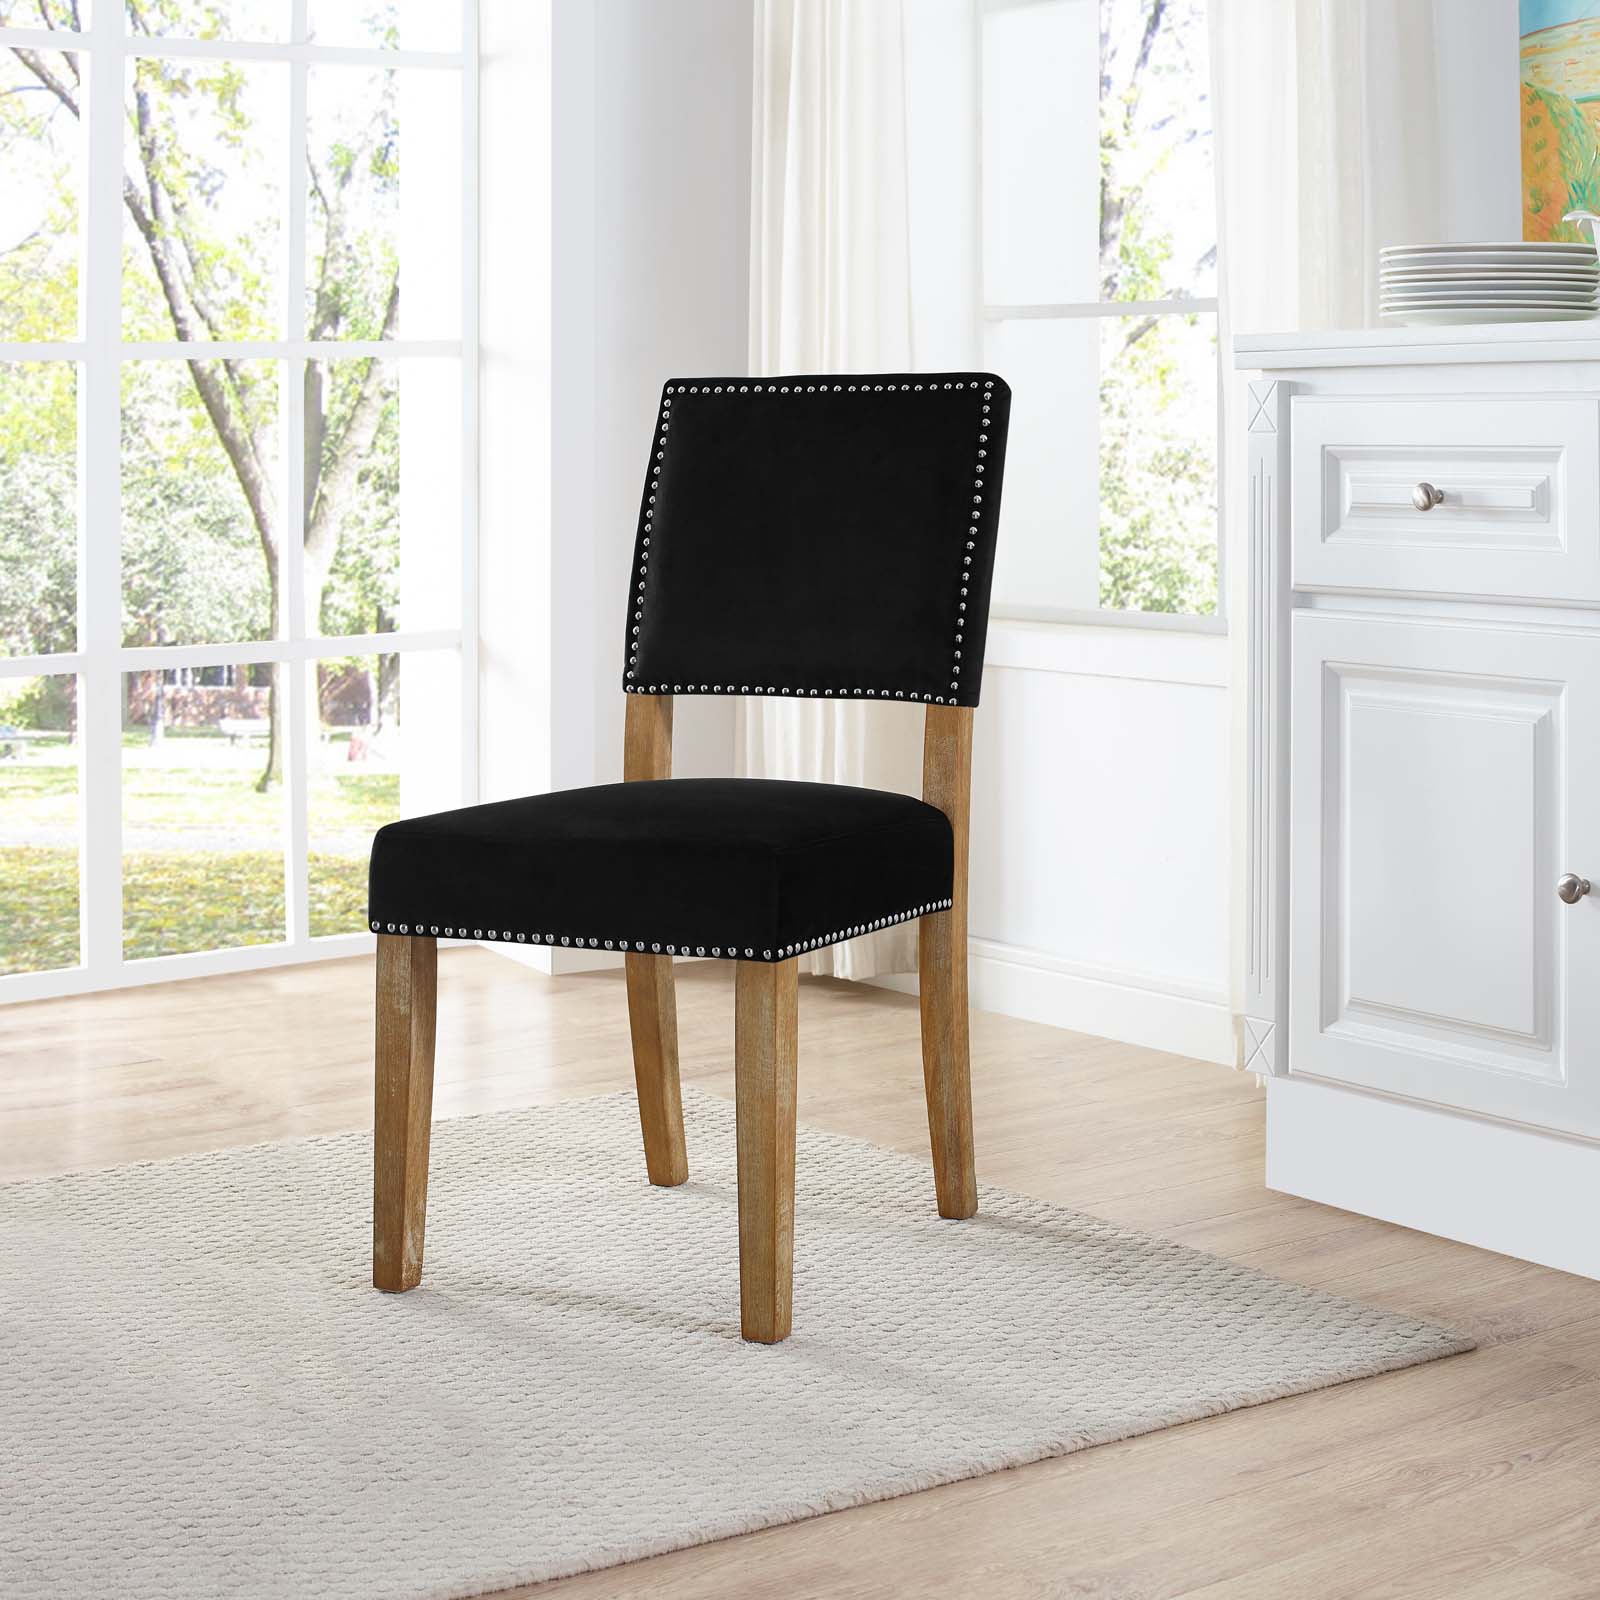 Oblige Wood Dining Chair Black